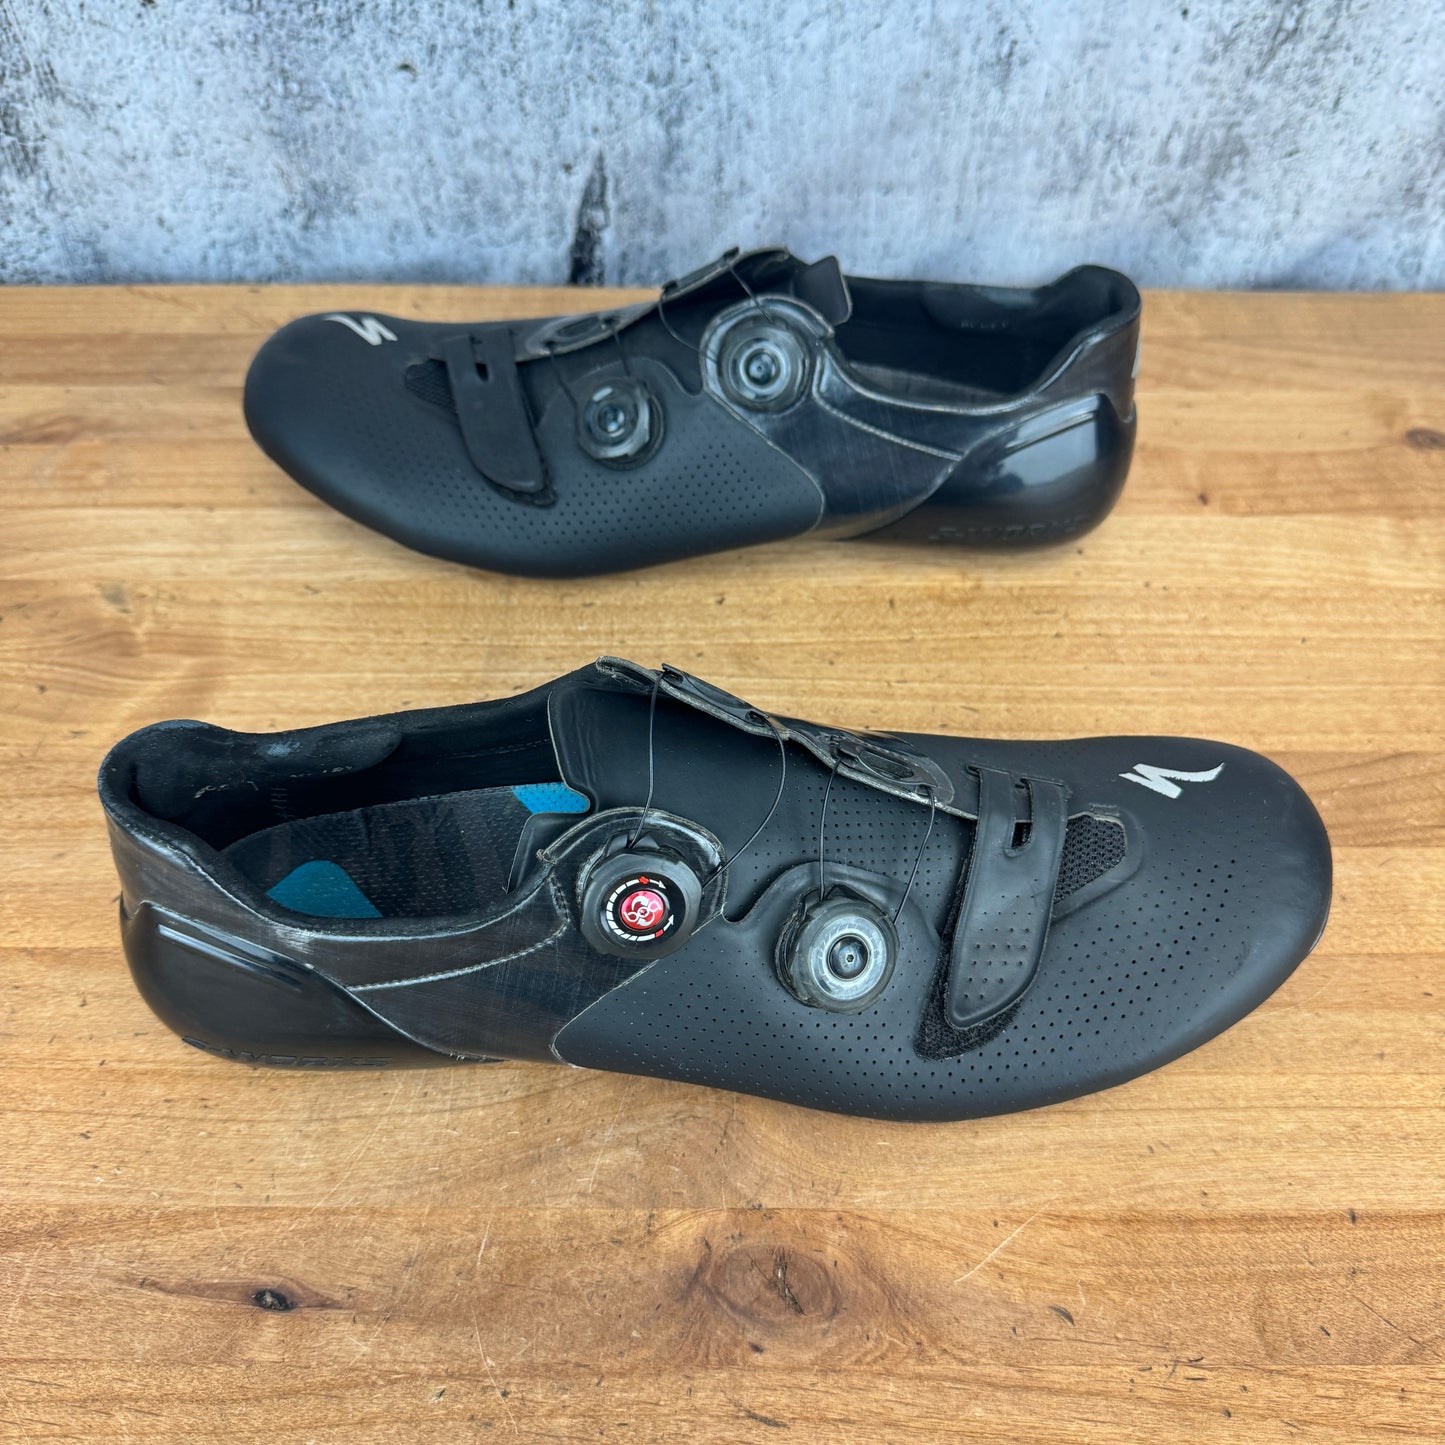 Specialized S-works 6 Road Narrow 47 EU 13 US Men's 3Bolt Cycling Shoes